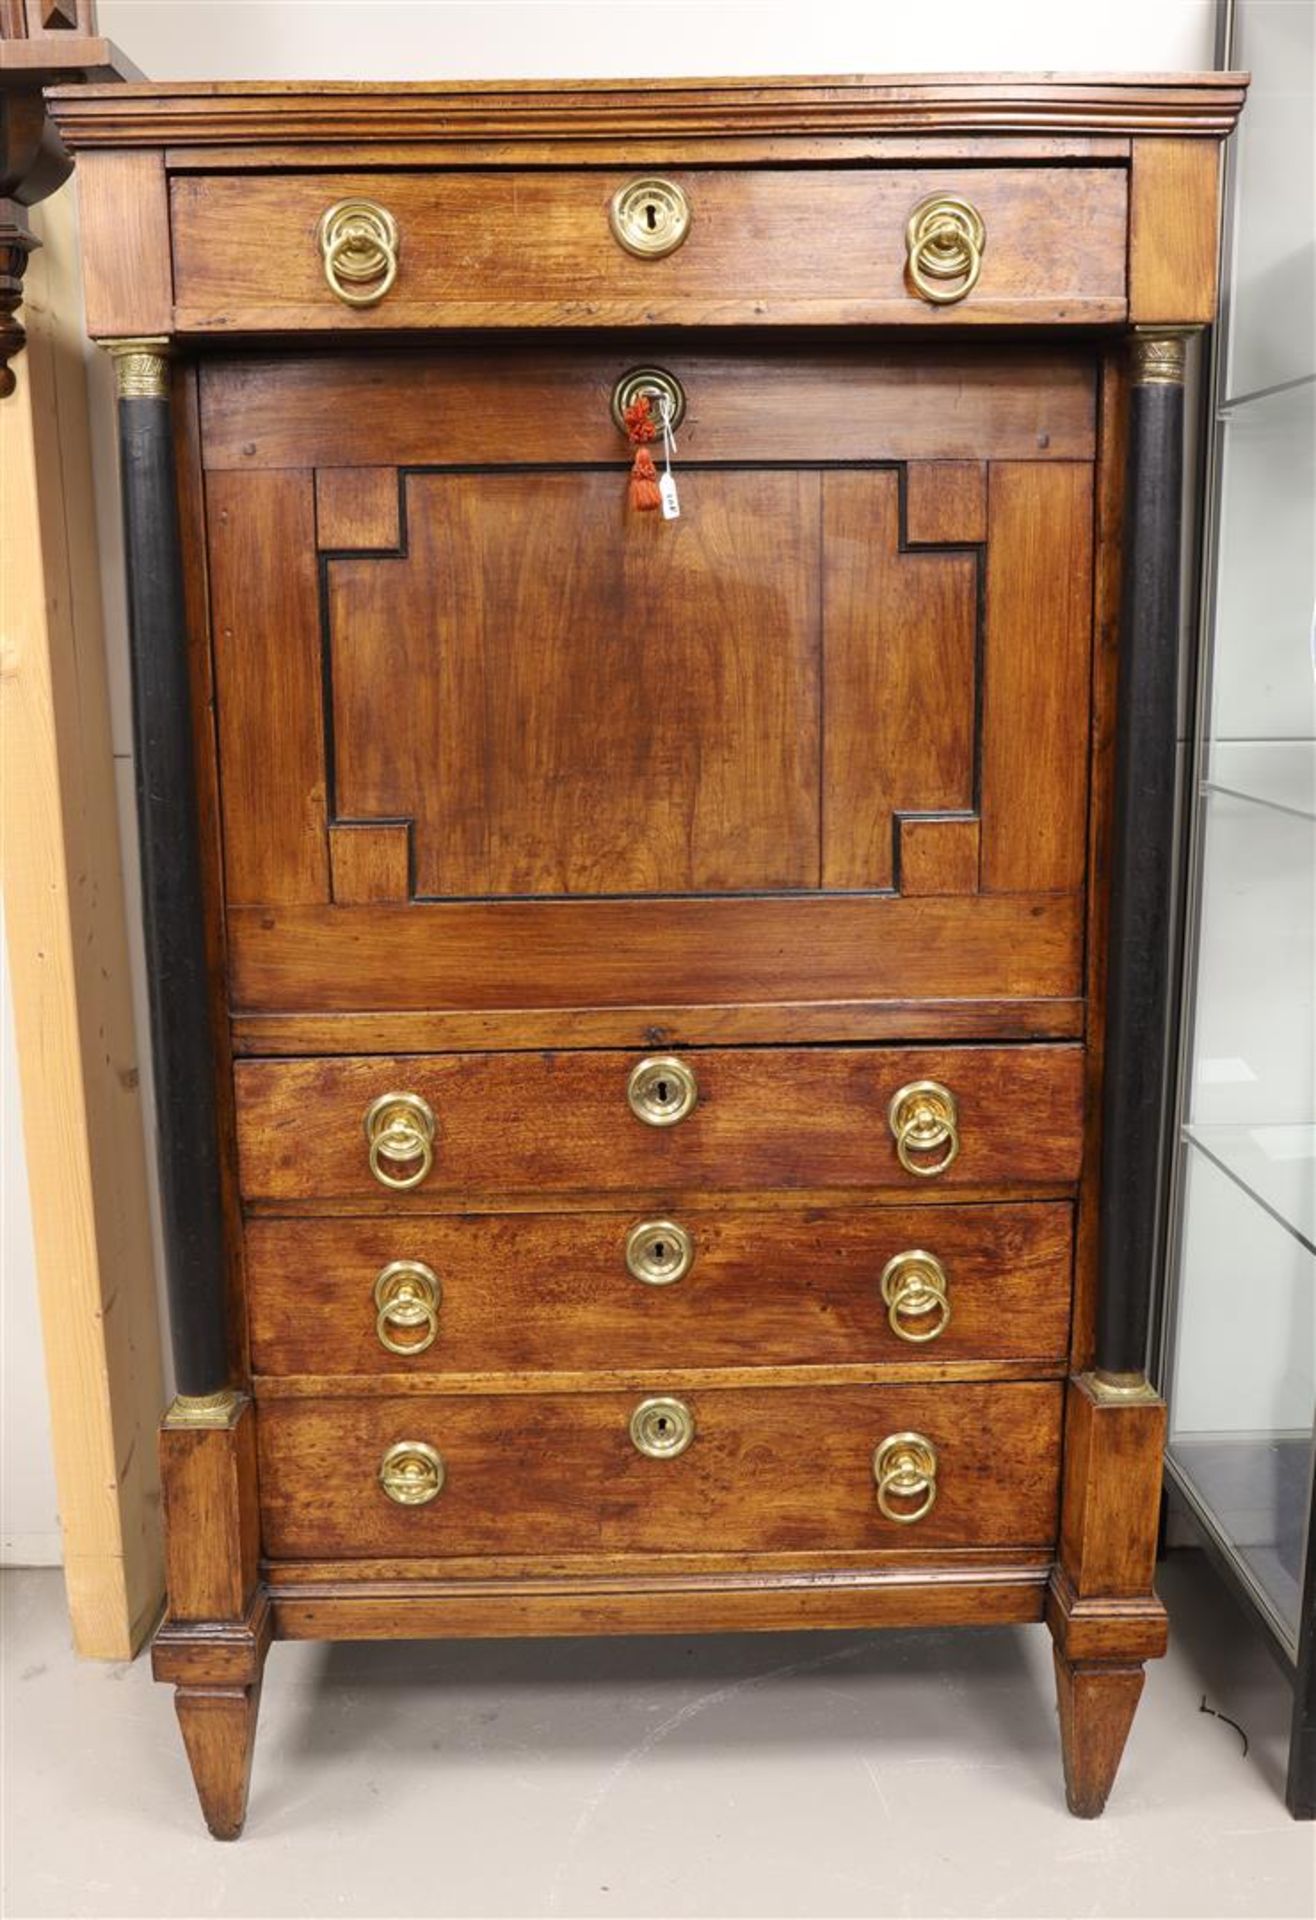 A secrétaireà abattant, Northern Netherlands, Neo Classicist, early 19th century. Oak wood, profiled